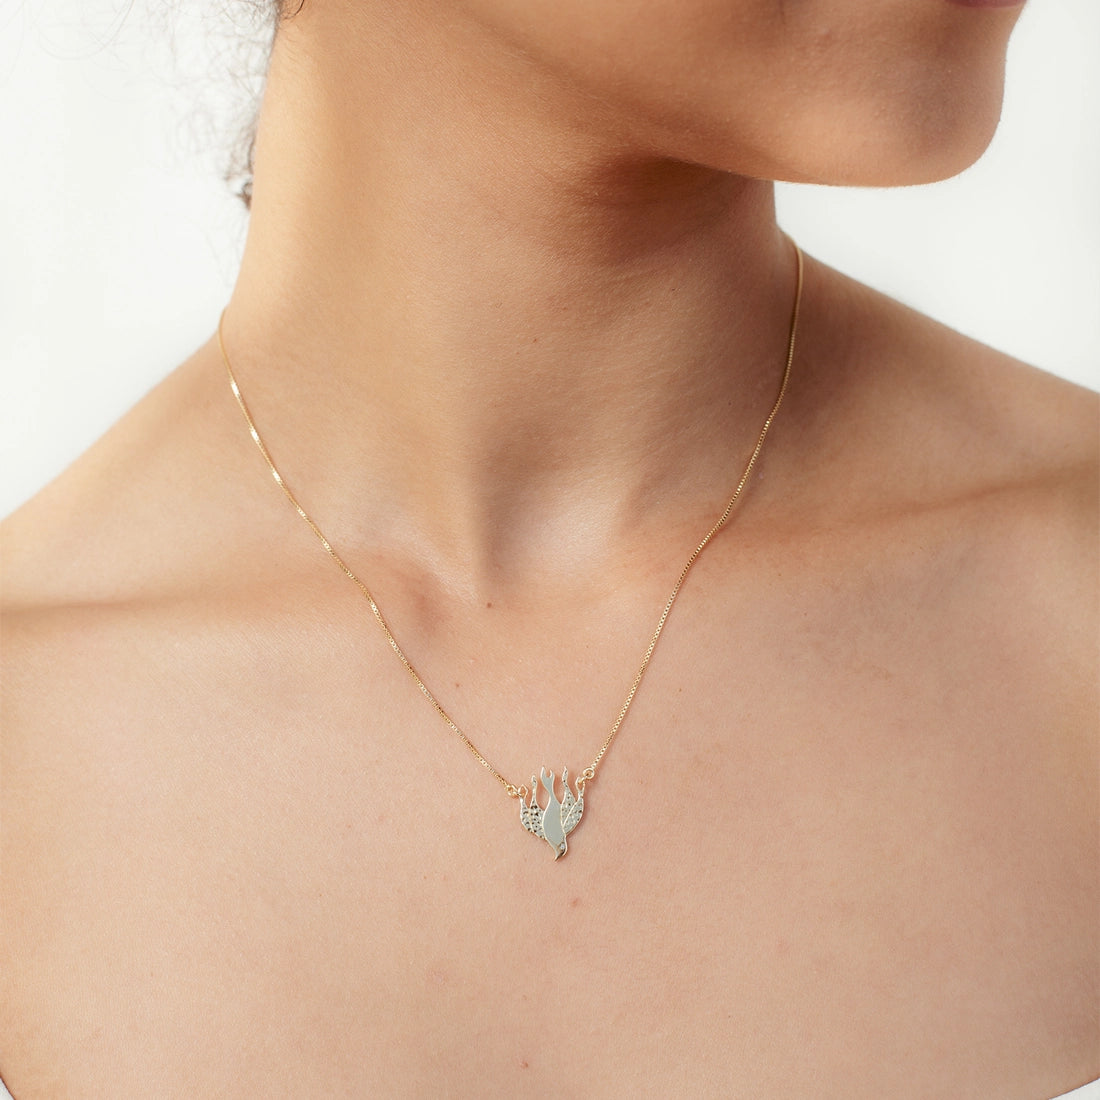 Christian woman wearing the Chispa de la Dove Necklace in 18k gold vermeil from the Chispa Collection by Rizen Jewelry.